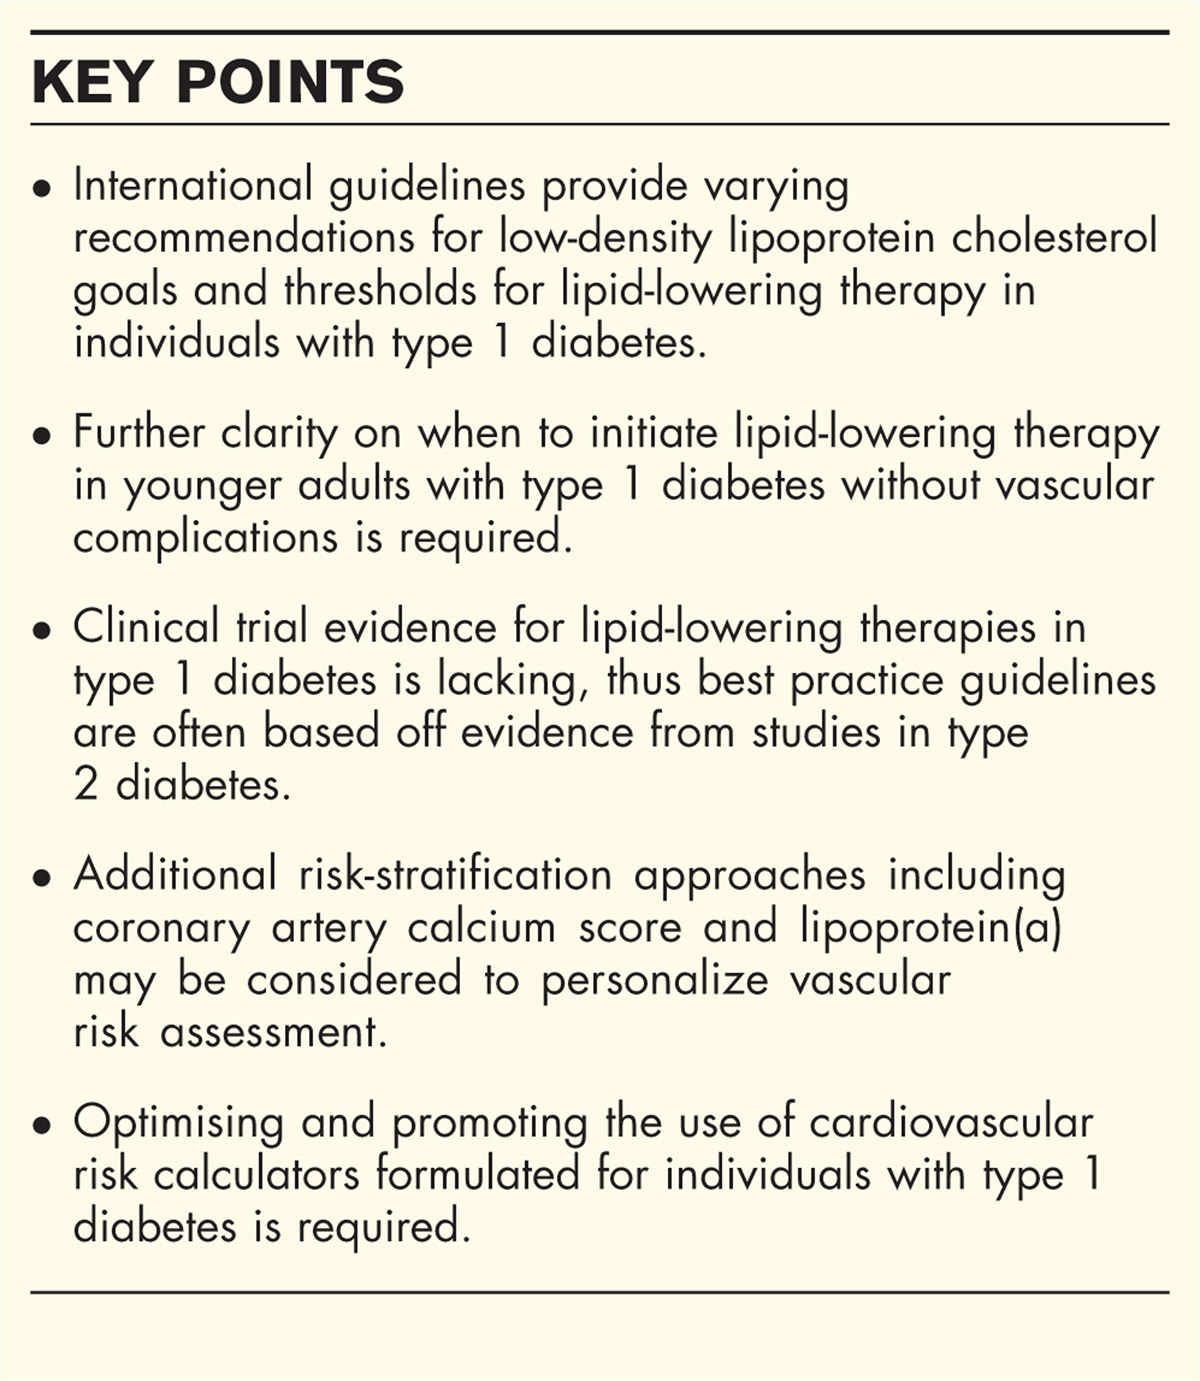 Lipid-lowering therapies and cardiovascular risk-stratification strategies in adults with type 1 diabetes